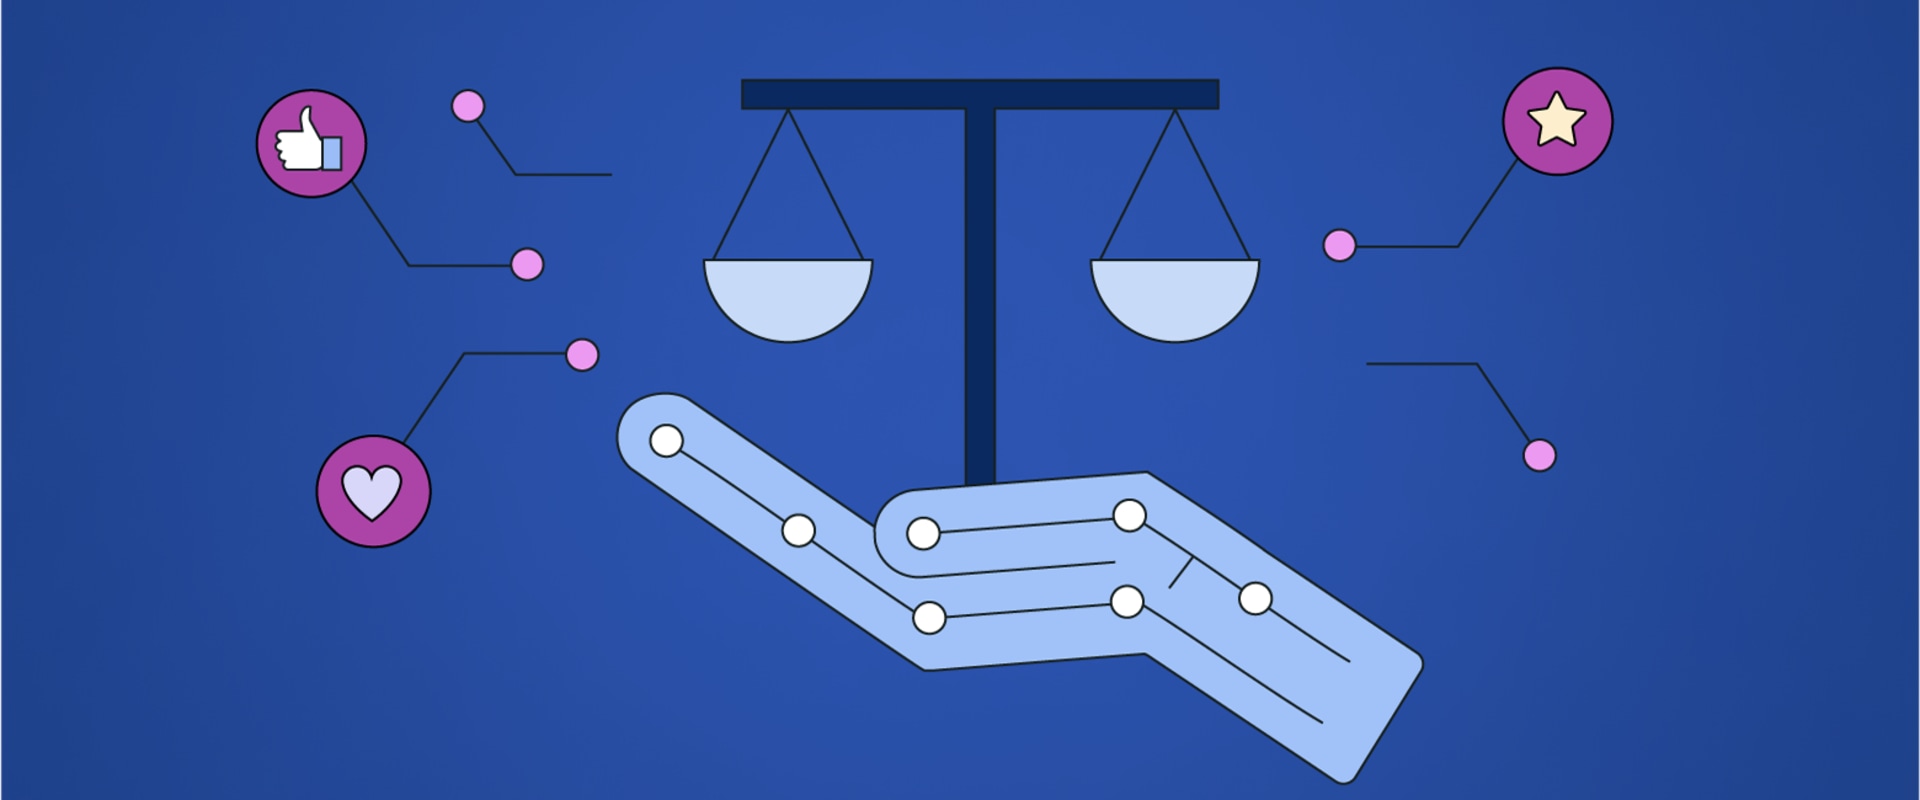 The Art of Ethical Link Building: Tips from an SEO Expert